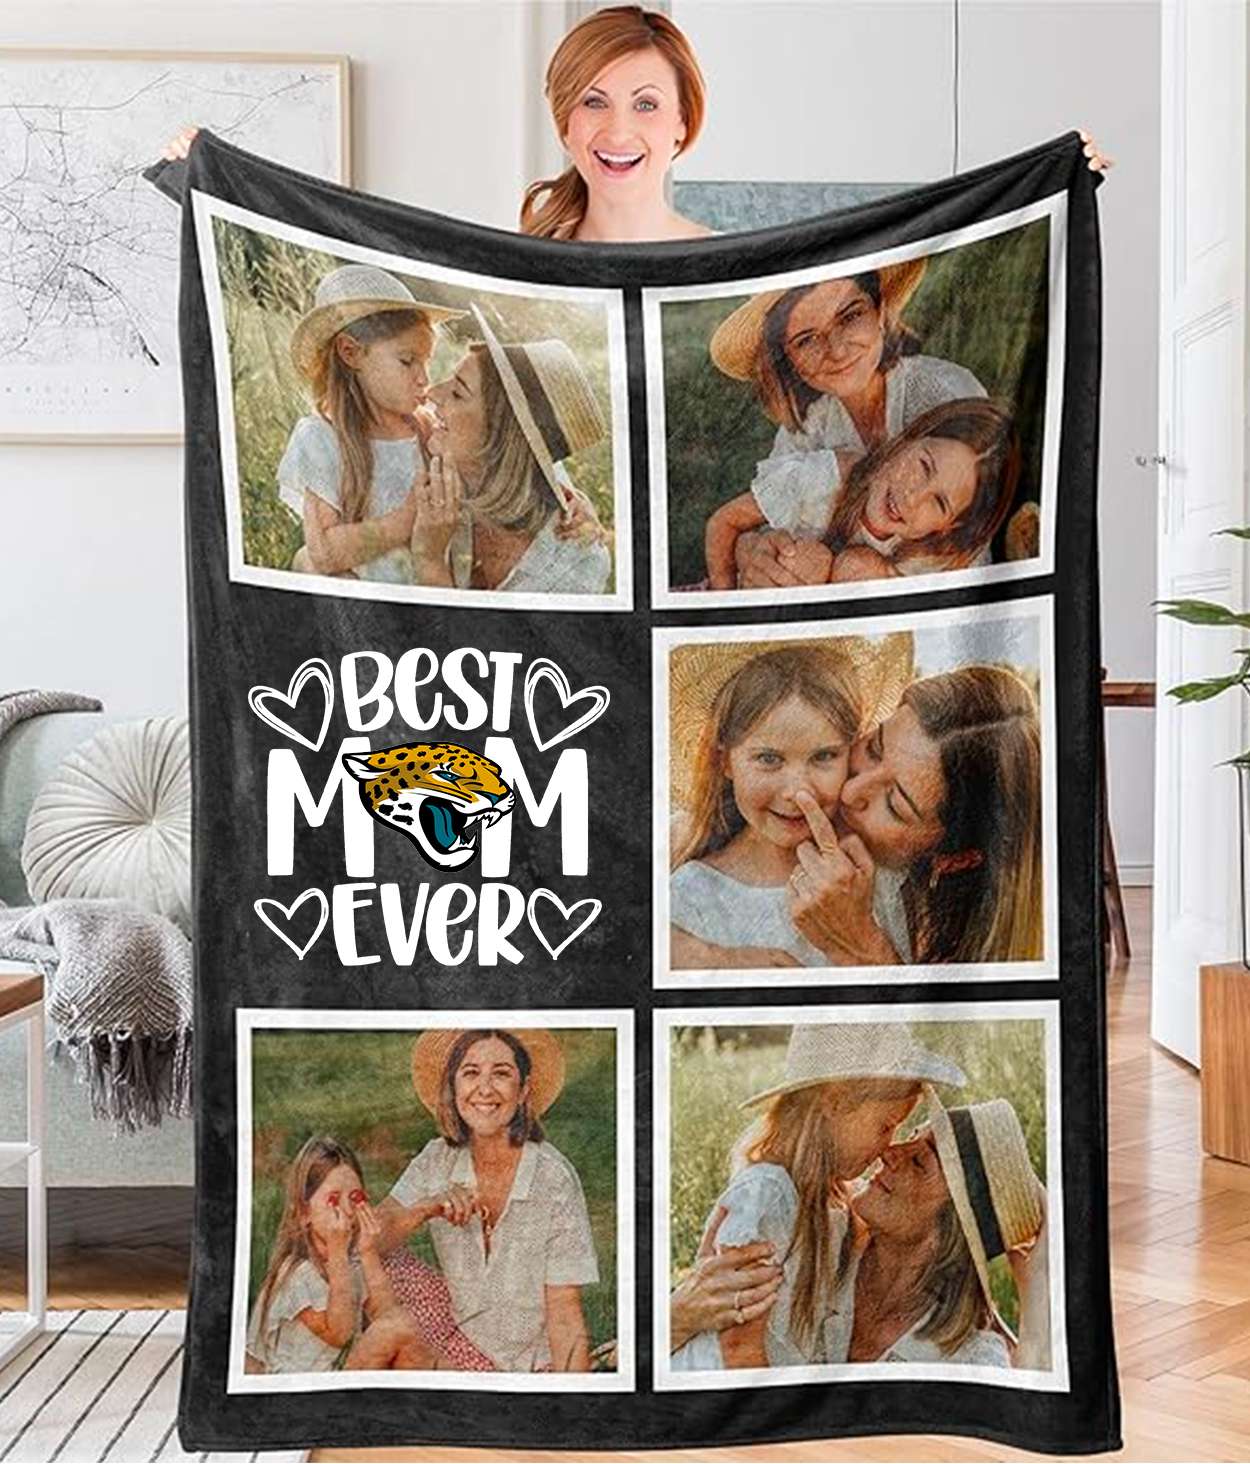 Best Mom Ever - Custom NFL Jacksonville Jaguars Blankets with Pictures for Mother's Day Gift